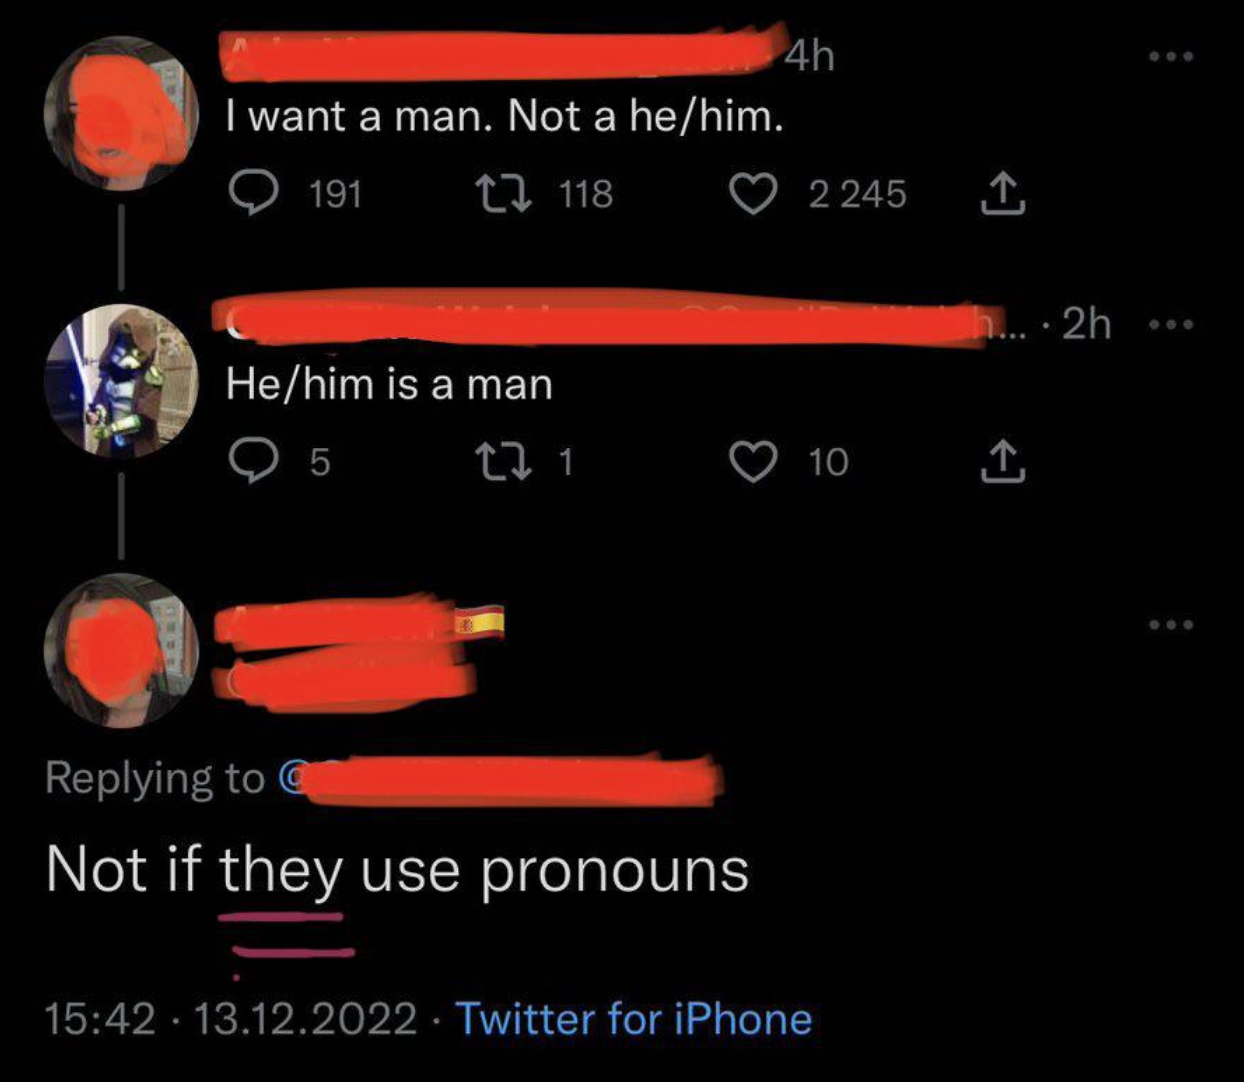 &quot;Not if they use pronouns&quot;